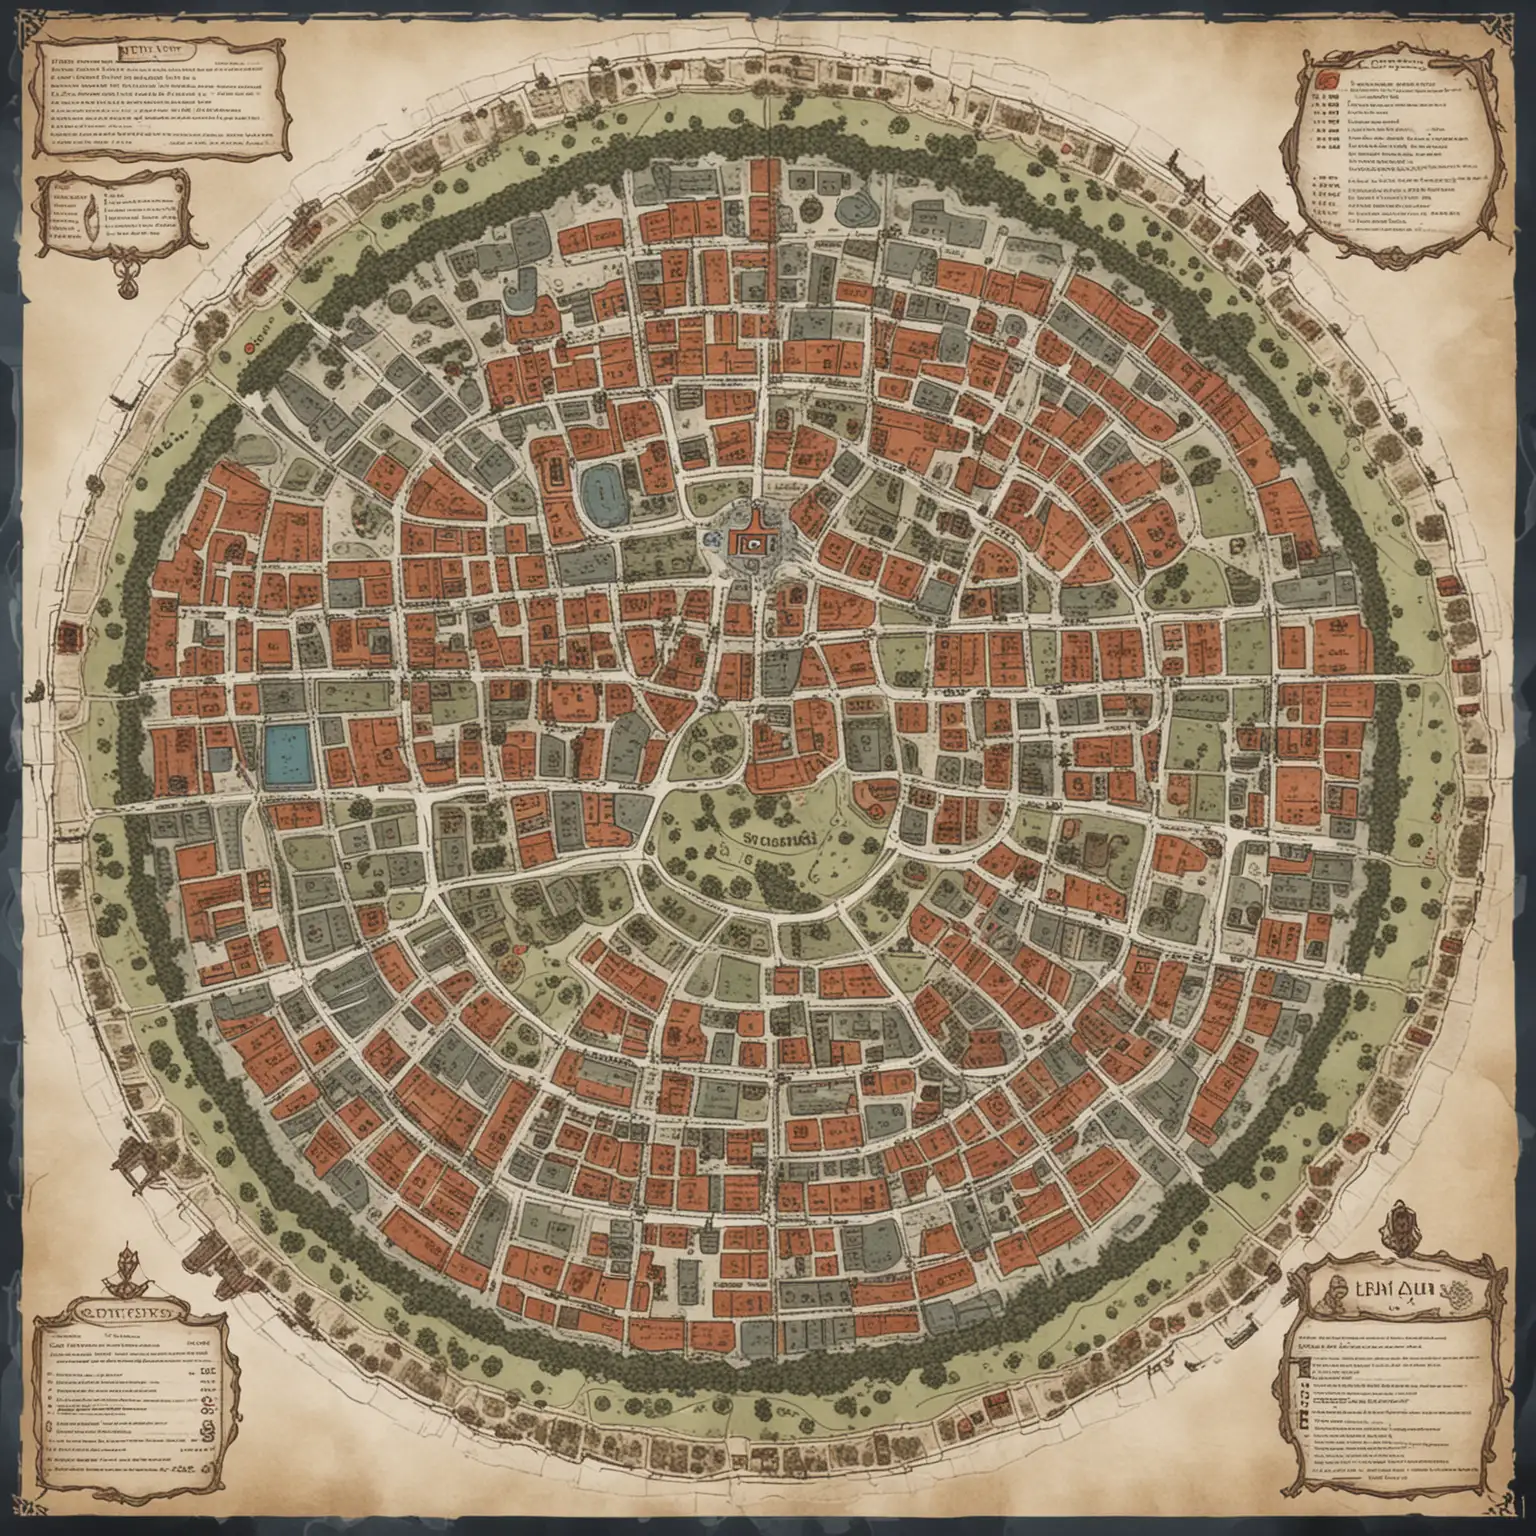 DND style combat map of round city, 25,000 population
three tiers, coloured
